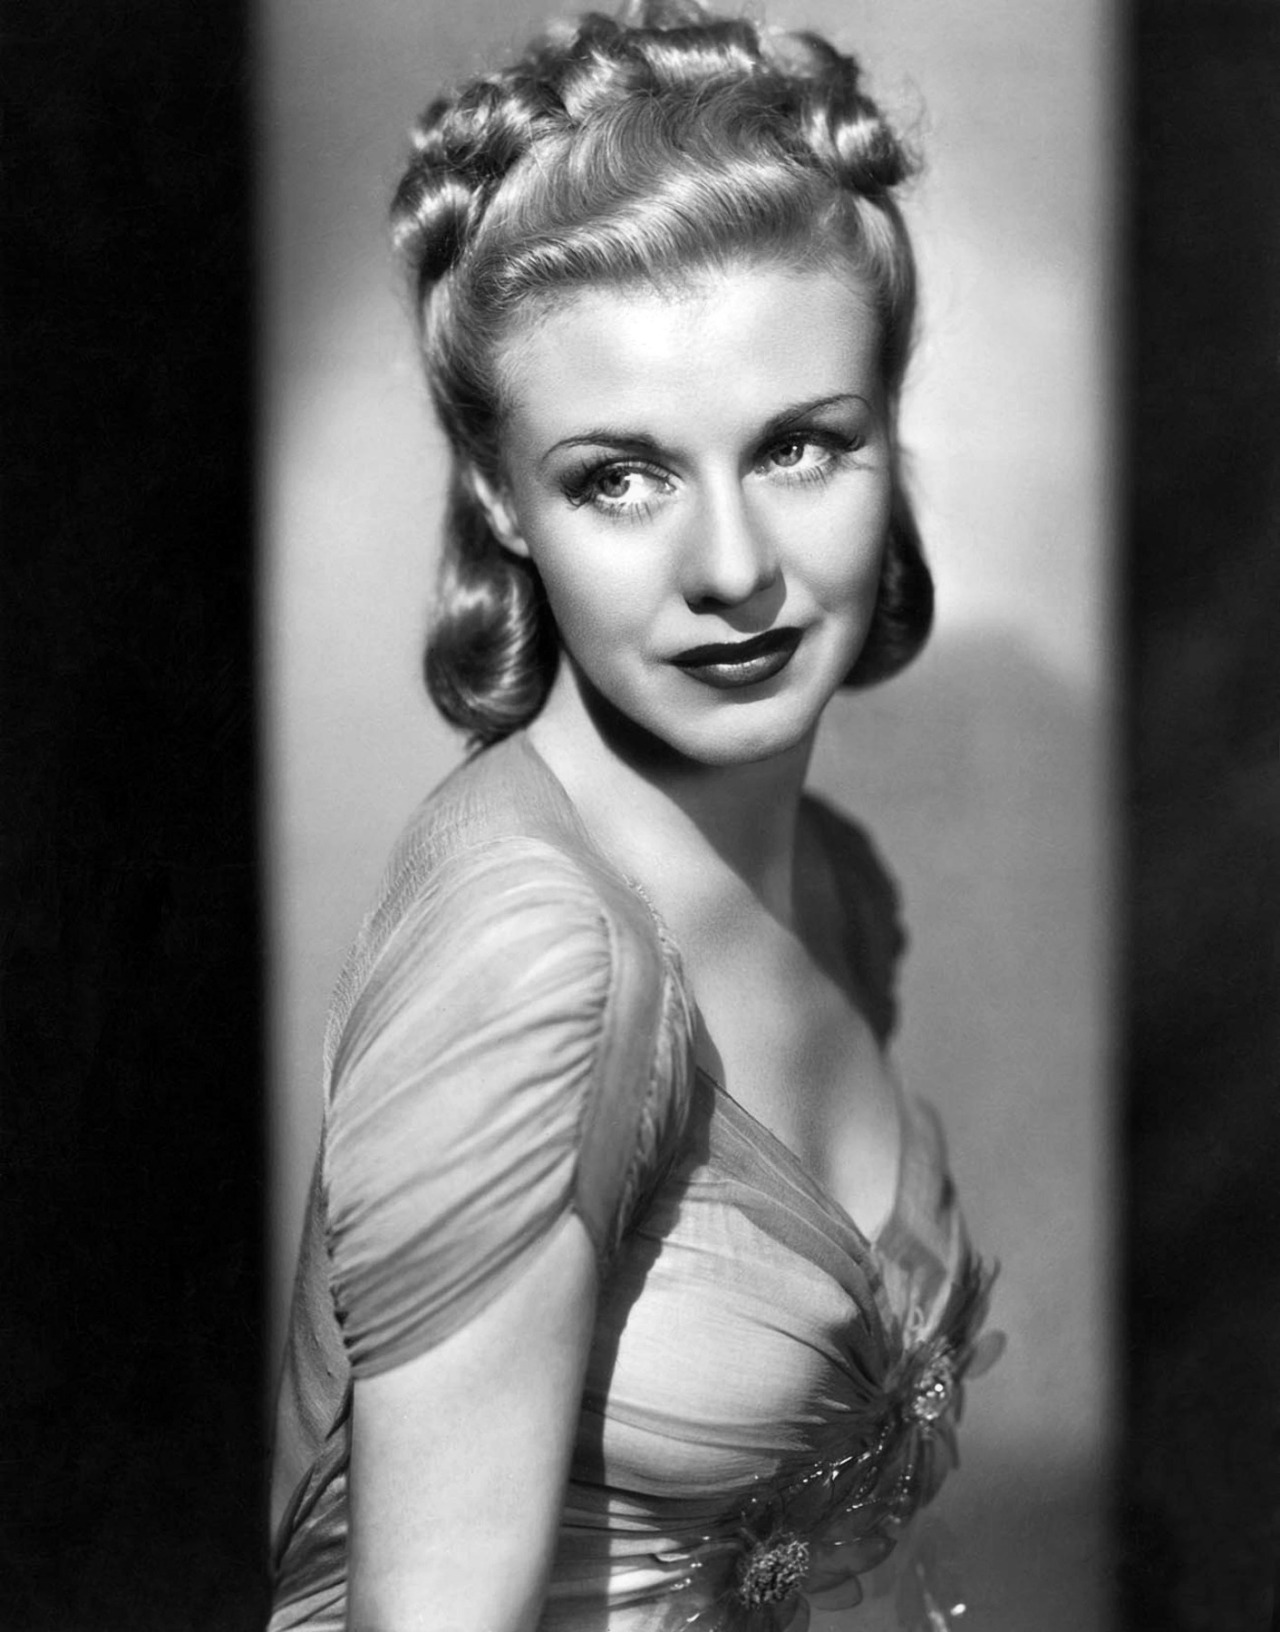 Of ginger rogers photos From Her